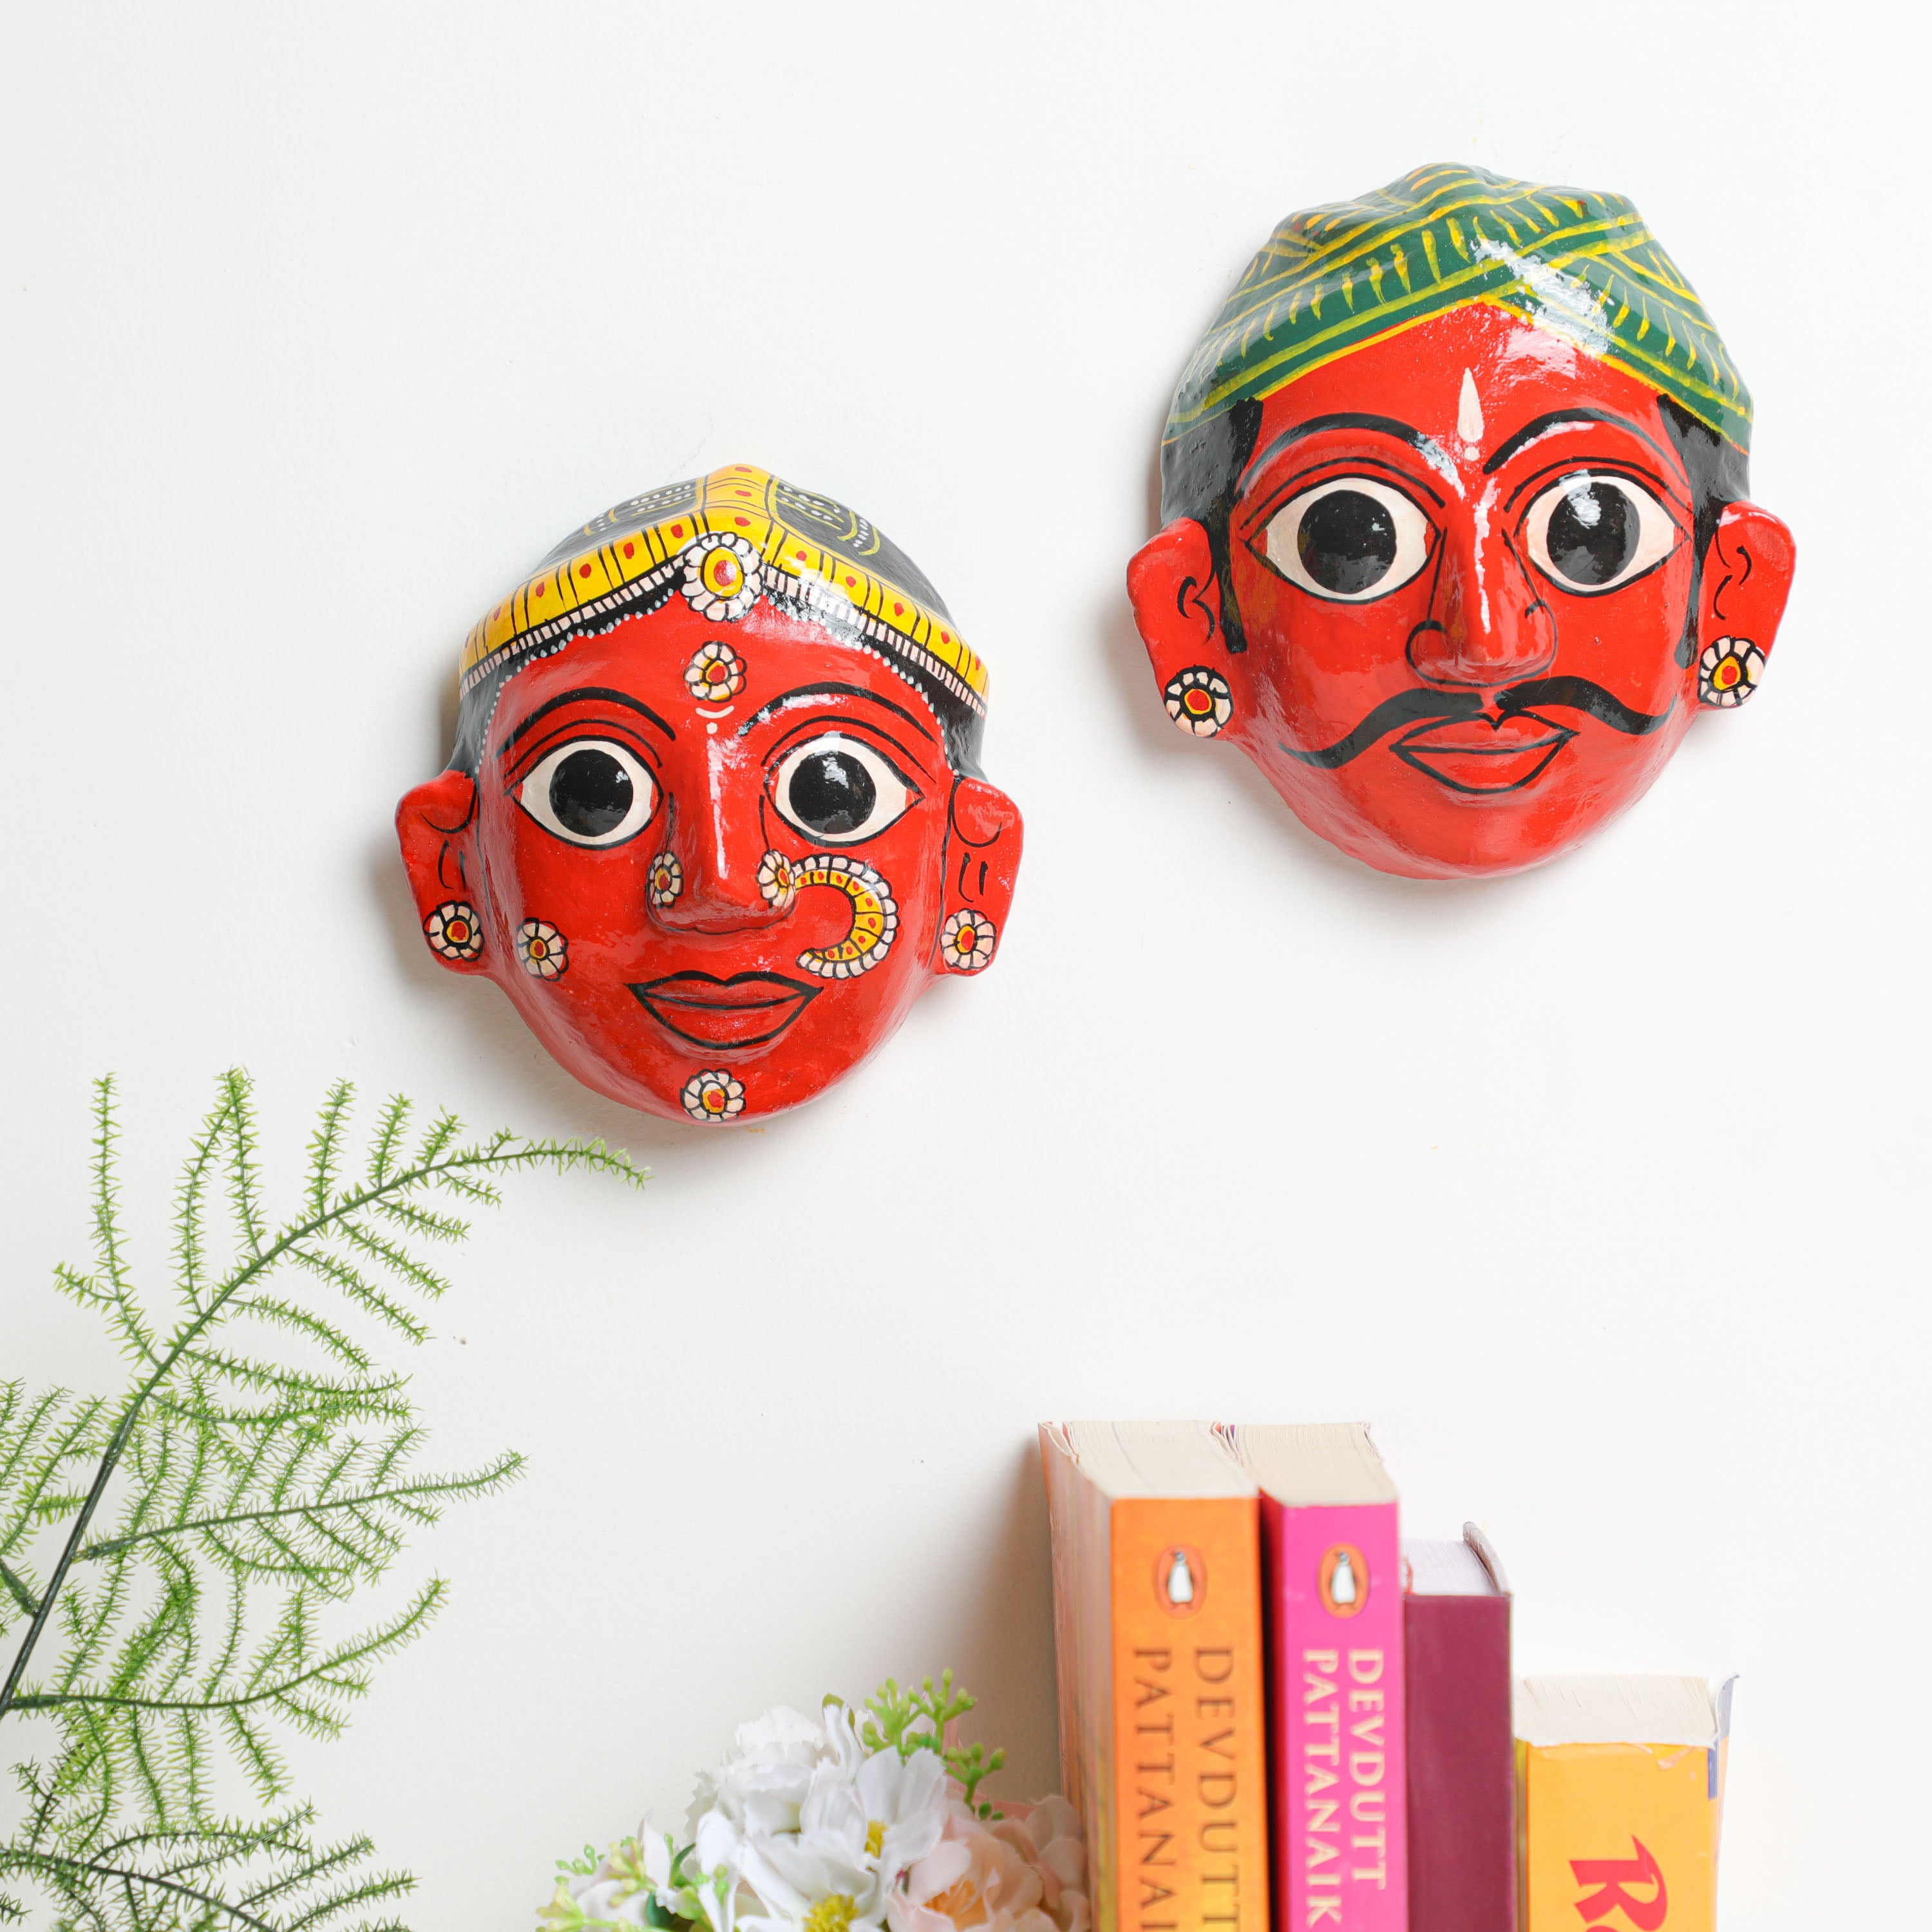 Cheriyal Face Wall Hangings for sale in the USA